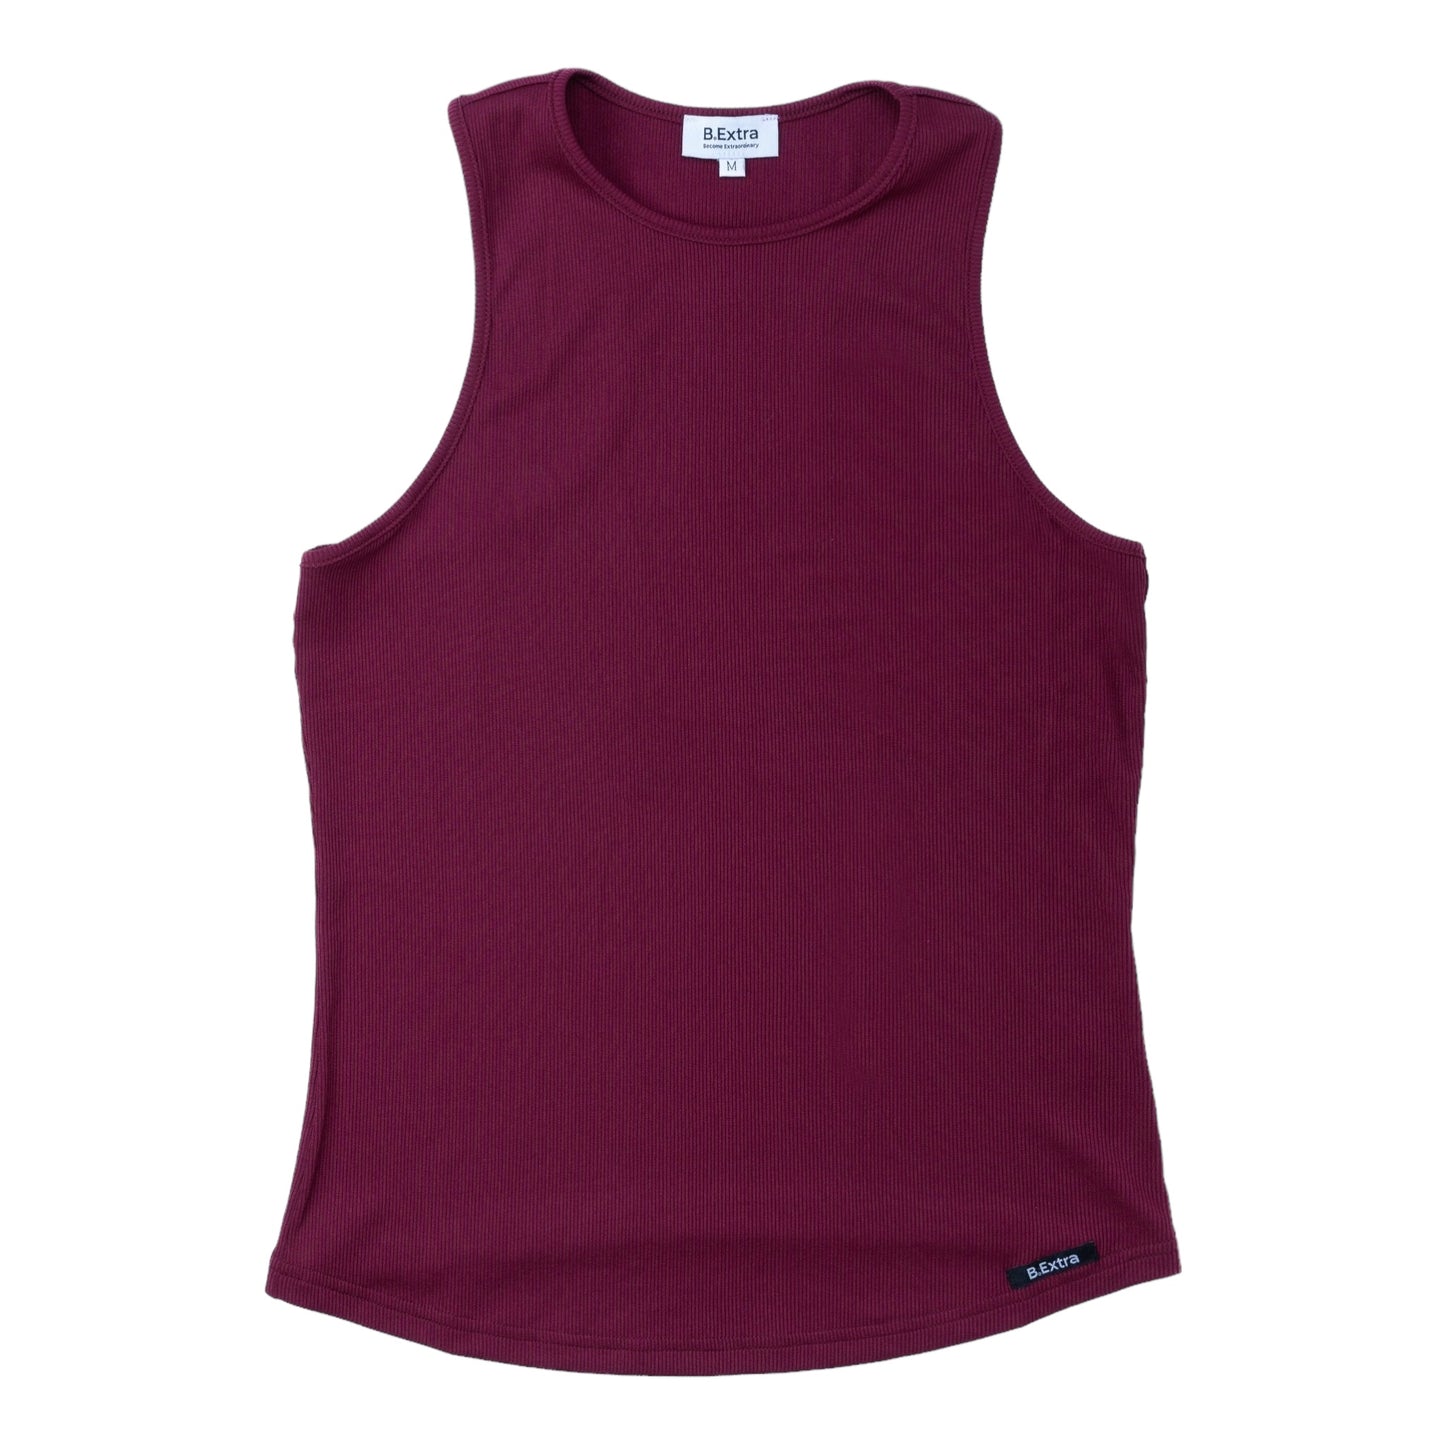 Ribbed Tank Top - Cherry Red